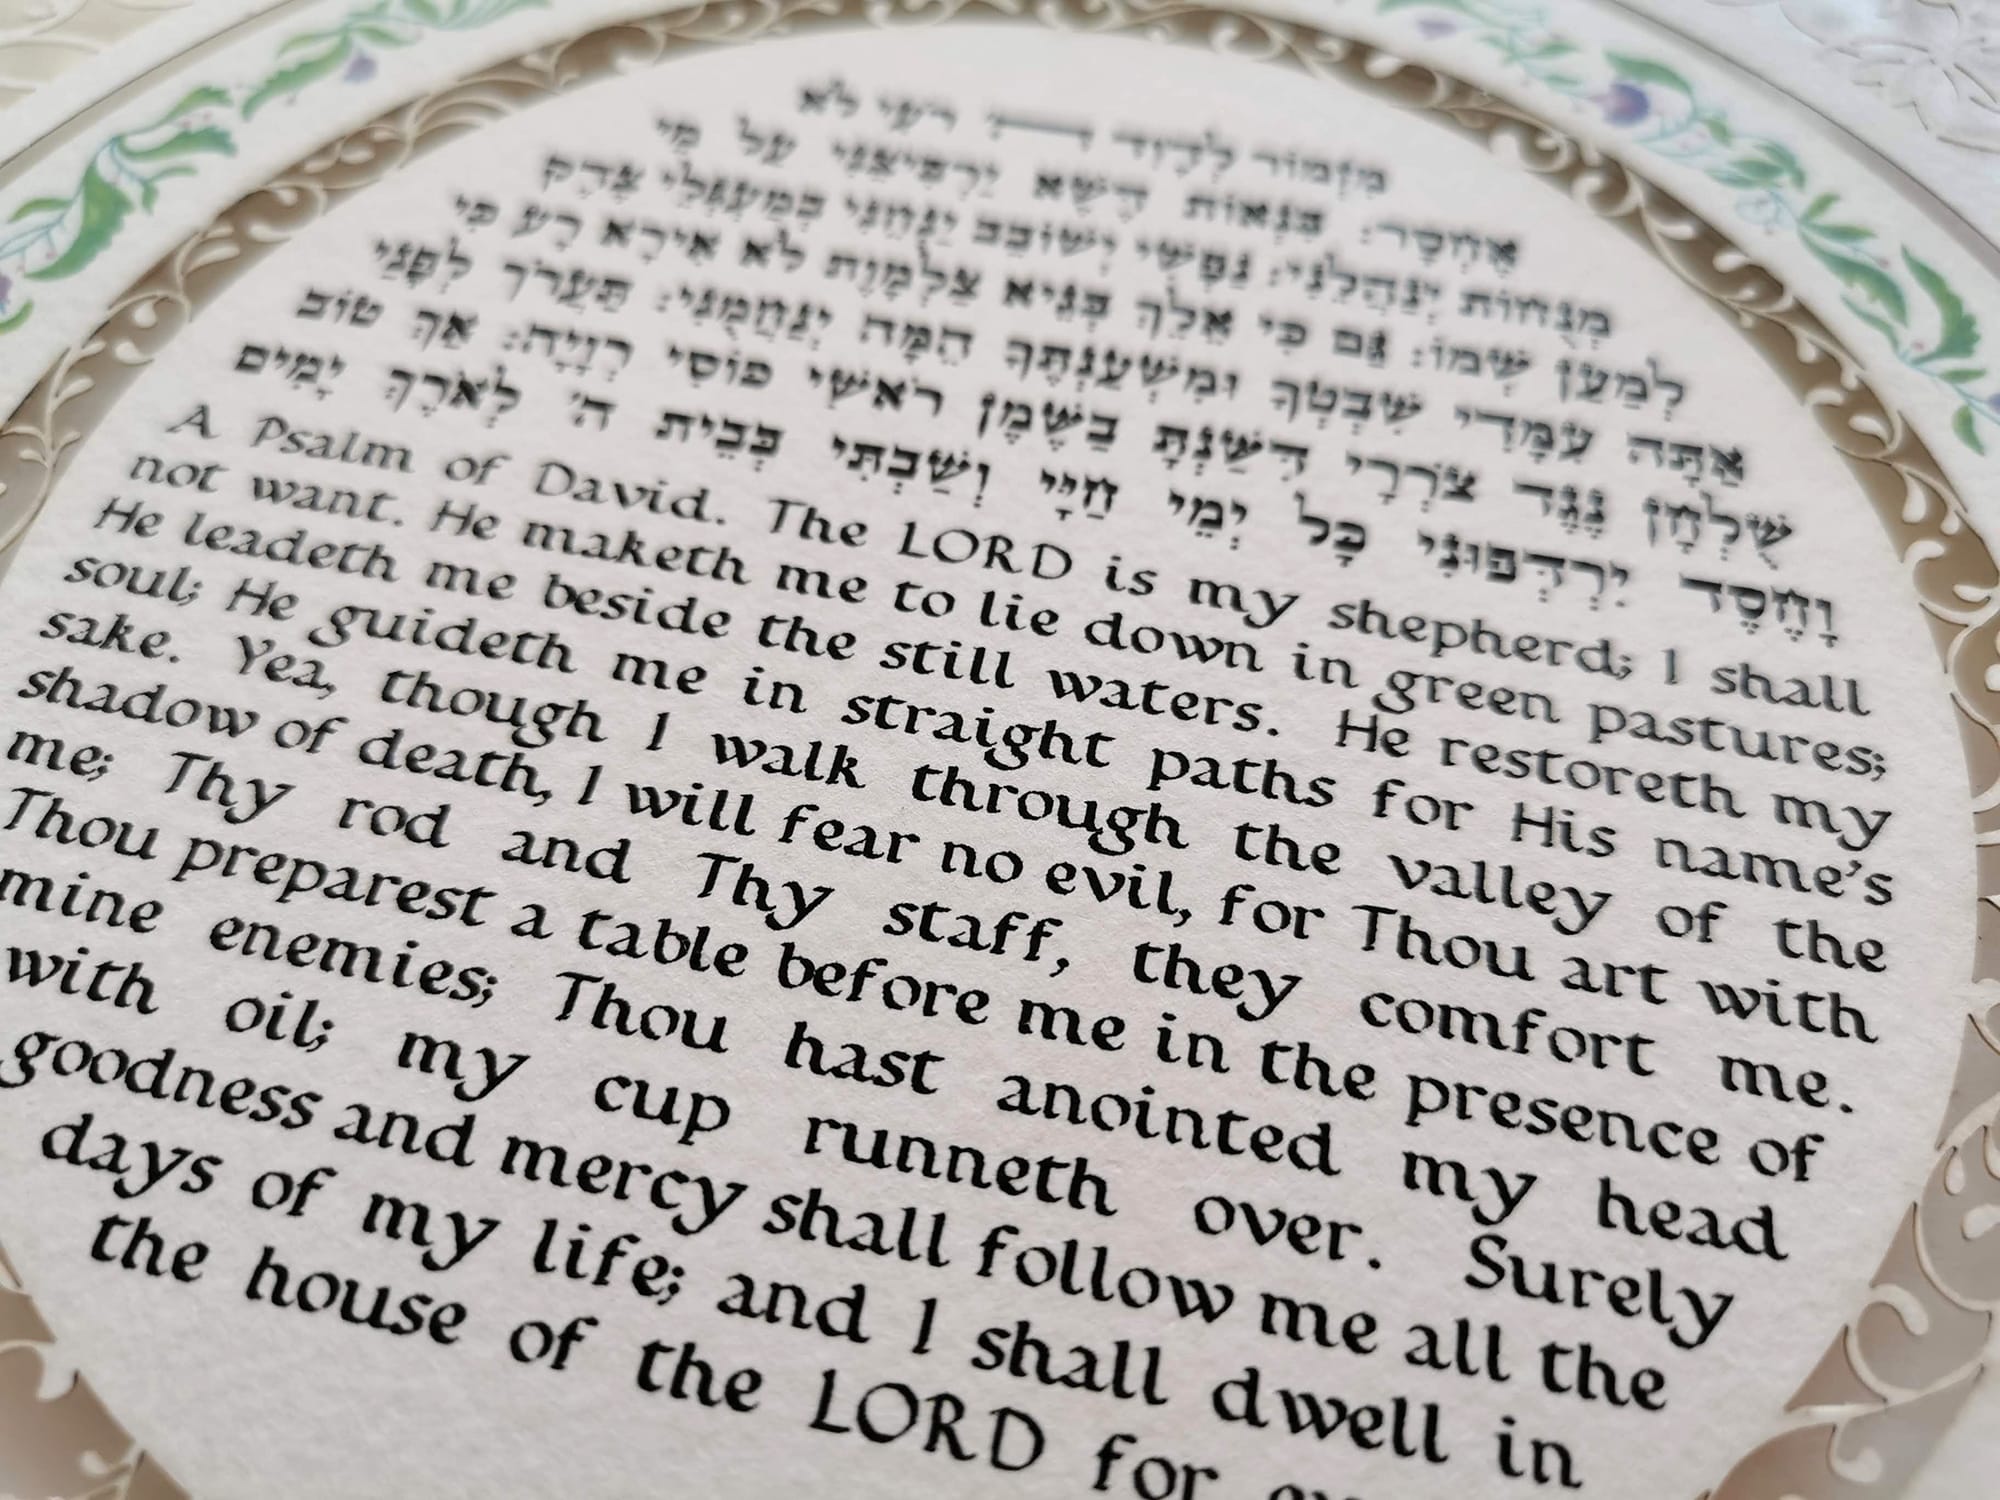 An image showing a traditional Ketubah from the 19th century